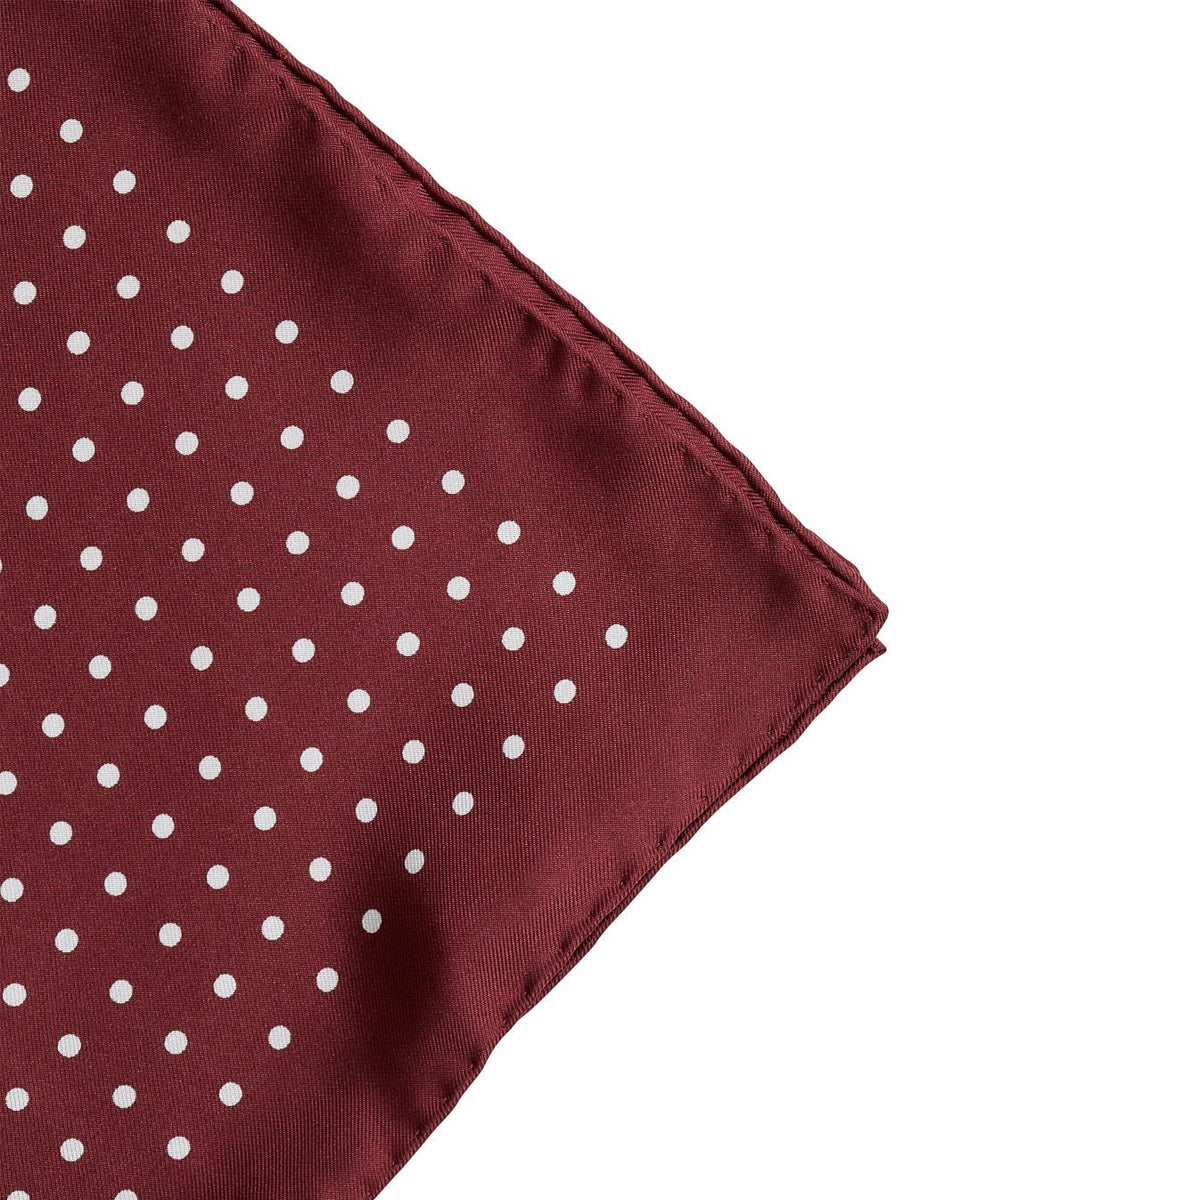 Sovereign Grade 100% Silk Burgundy London Dot Pocket Square by KirbyAllison.com for a formal outfit.